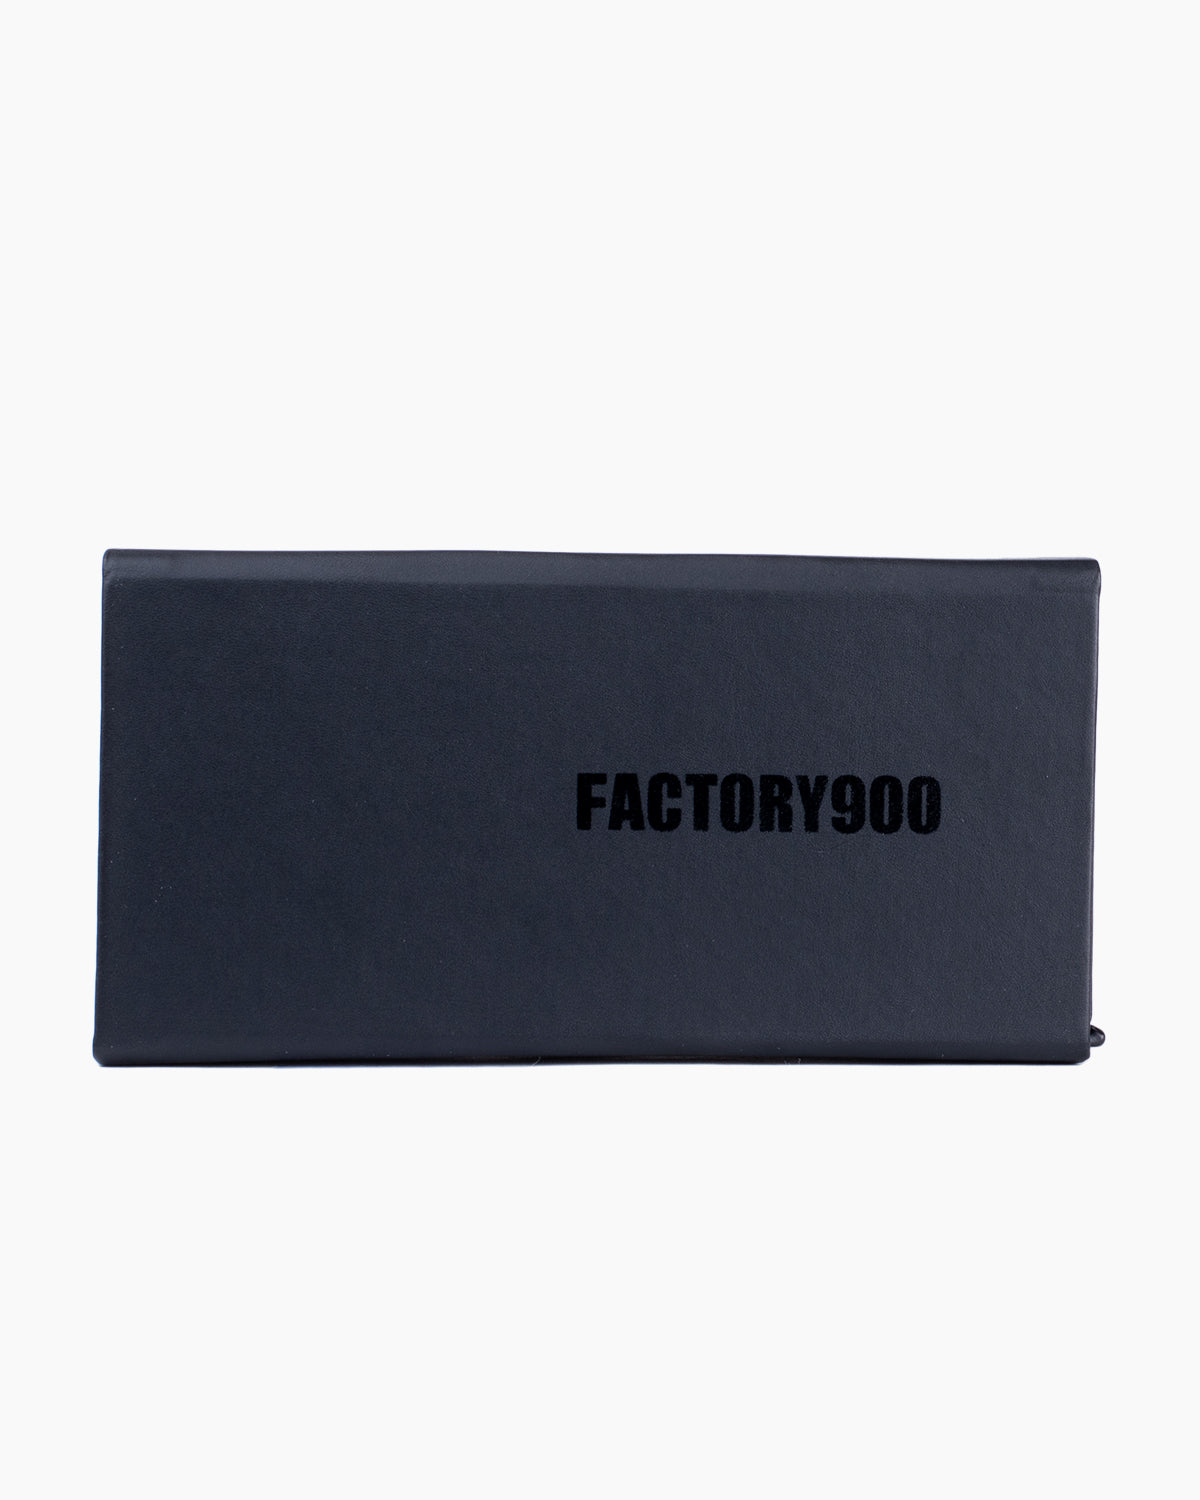 Factory 900 - MF001 - 03 | glasses bar:  Marie-Sophie Dion